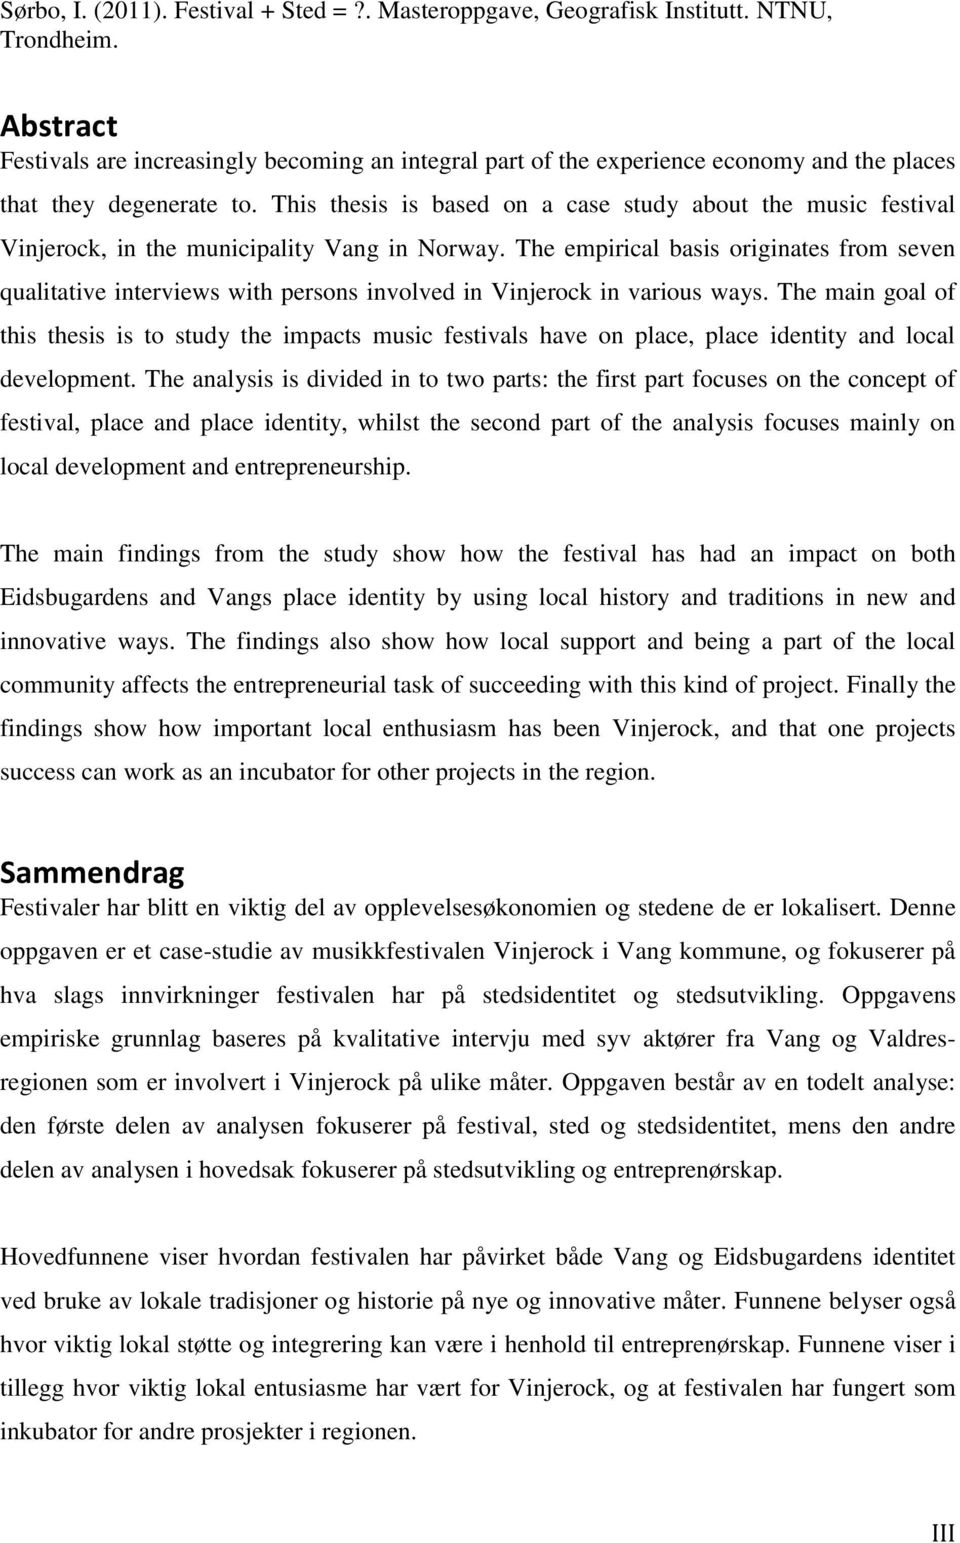 This thesis is based on a case study about the music festival Vinjerock, in the municipality Vang in Norway.